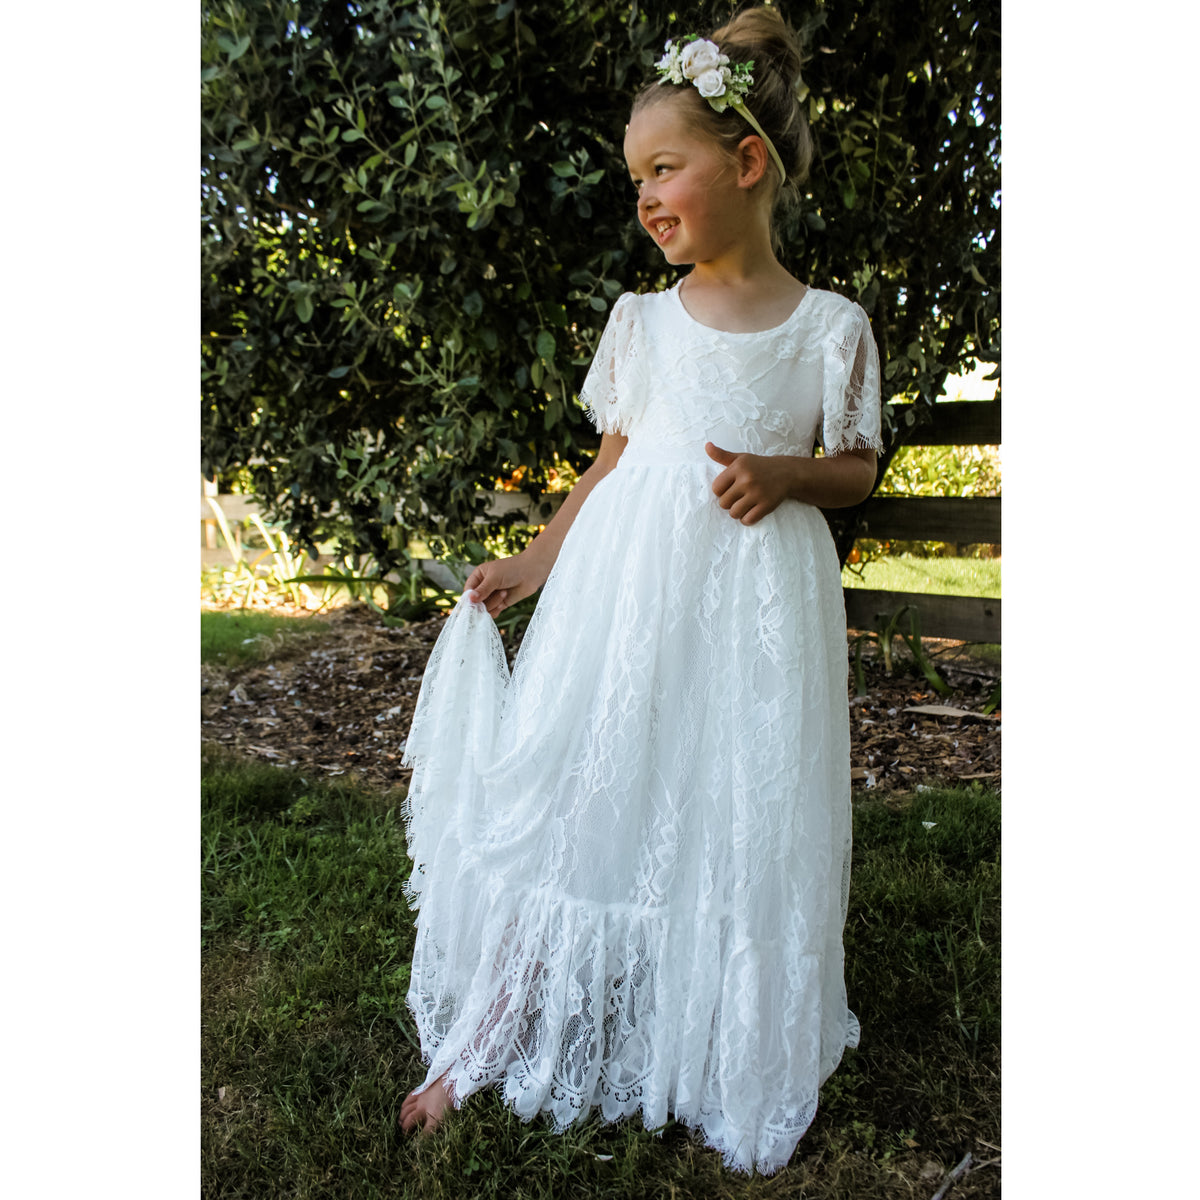 Violette white lace flower girl dress, worn by a flower girl. She also wears our Delilah ivory floral headband.